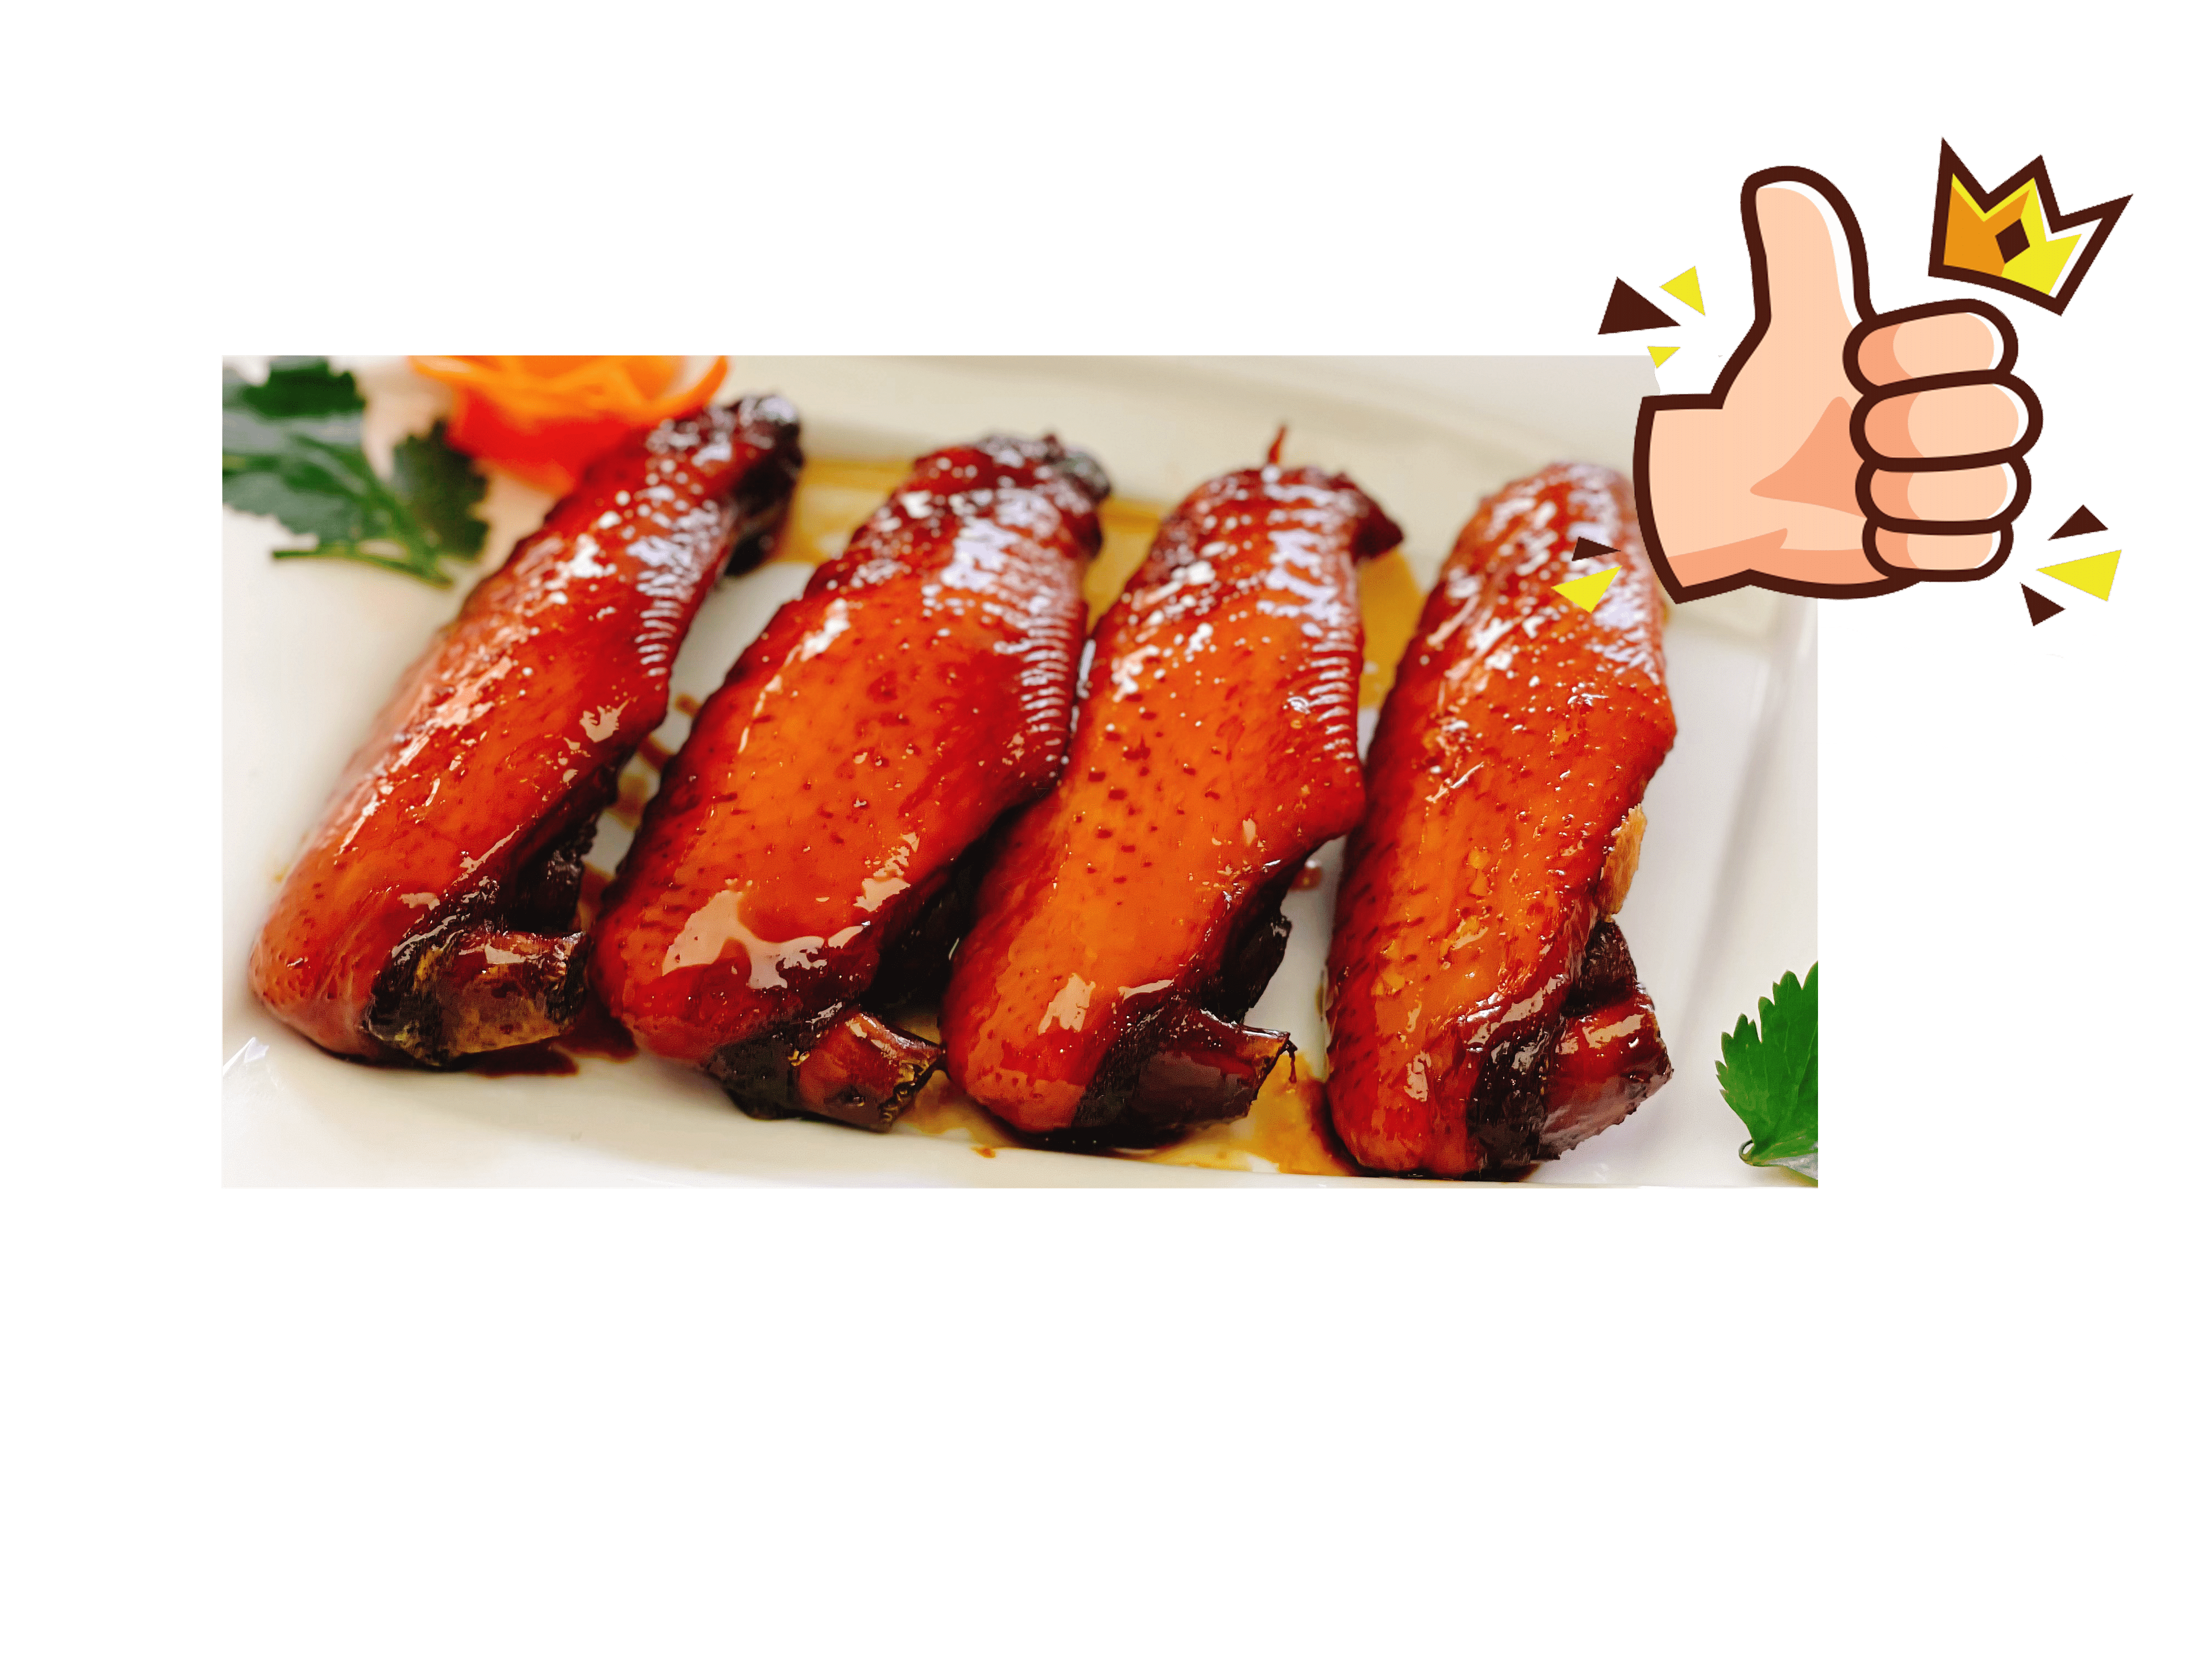 Soy Sauce Chicken Wings